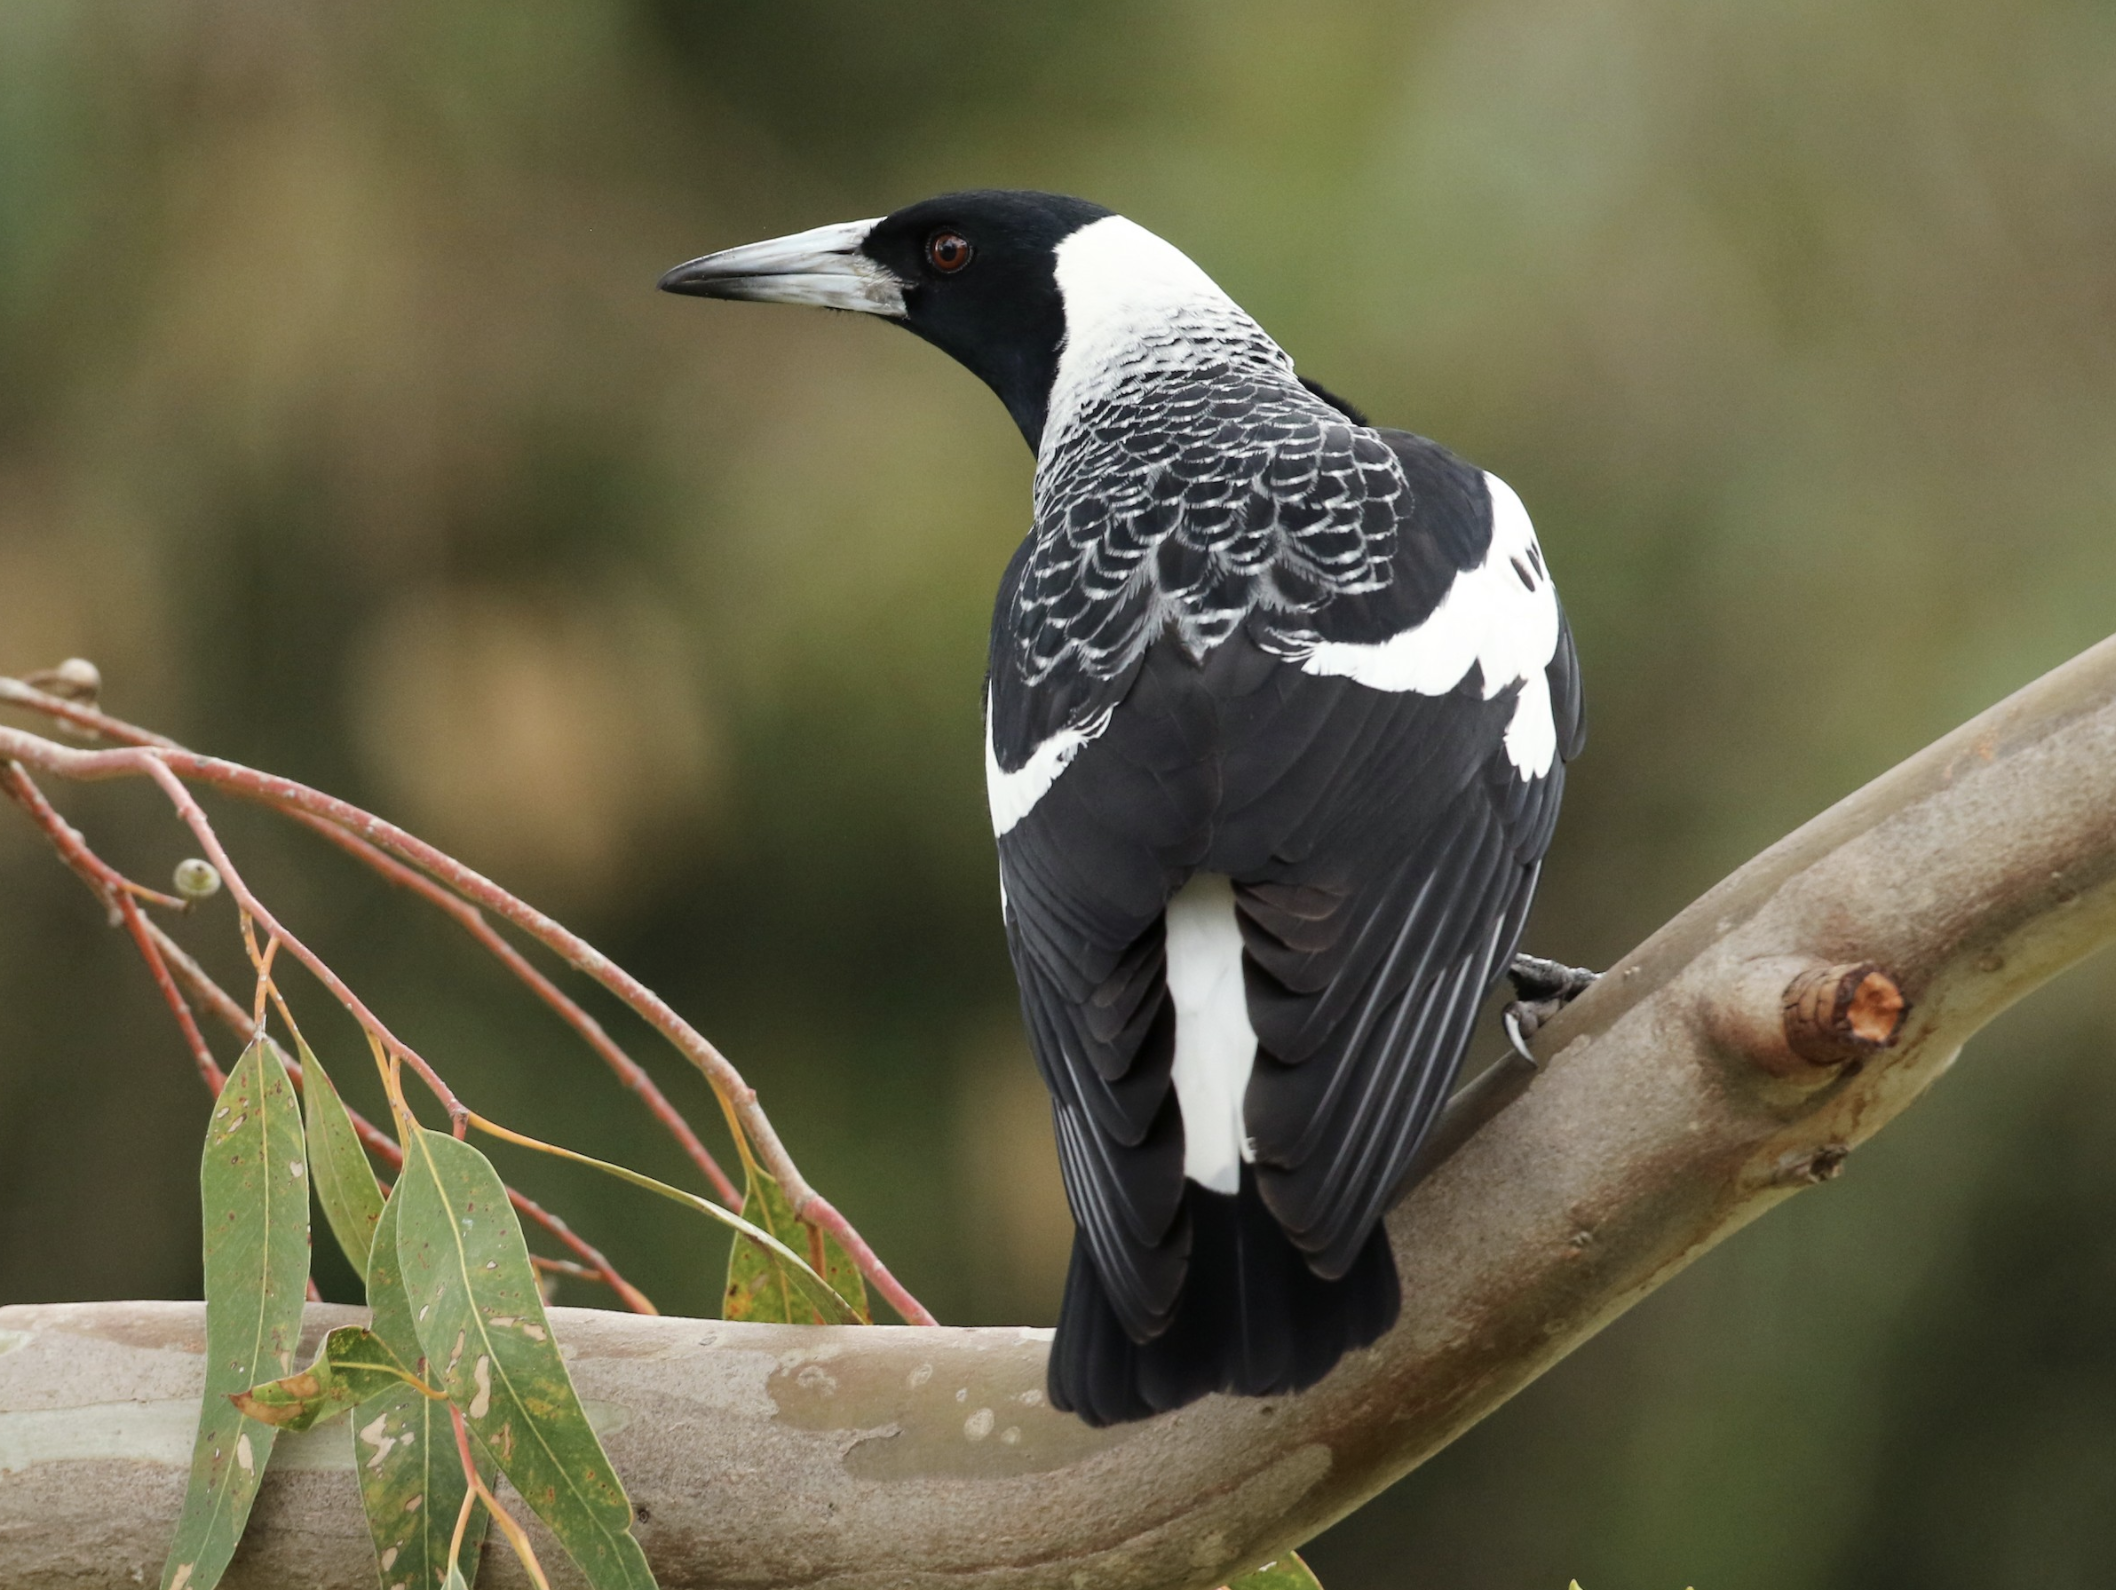 ‘World’s Smartest Bird’ Strikes Again: AU Magpies Remove Research Radio-Collars, Leaving Scientists Stunned